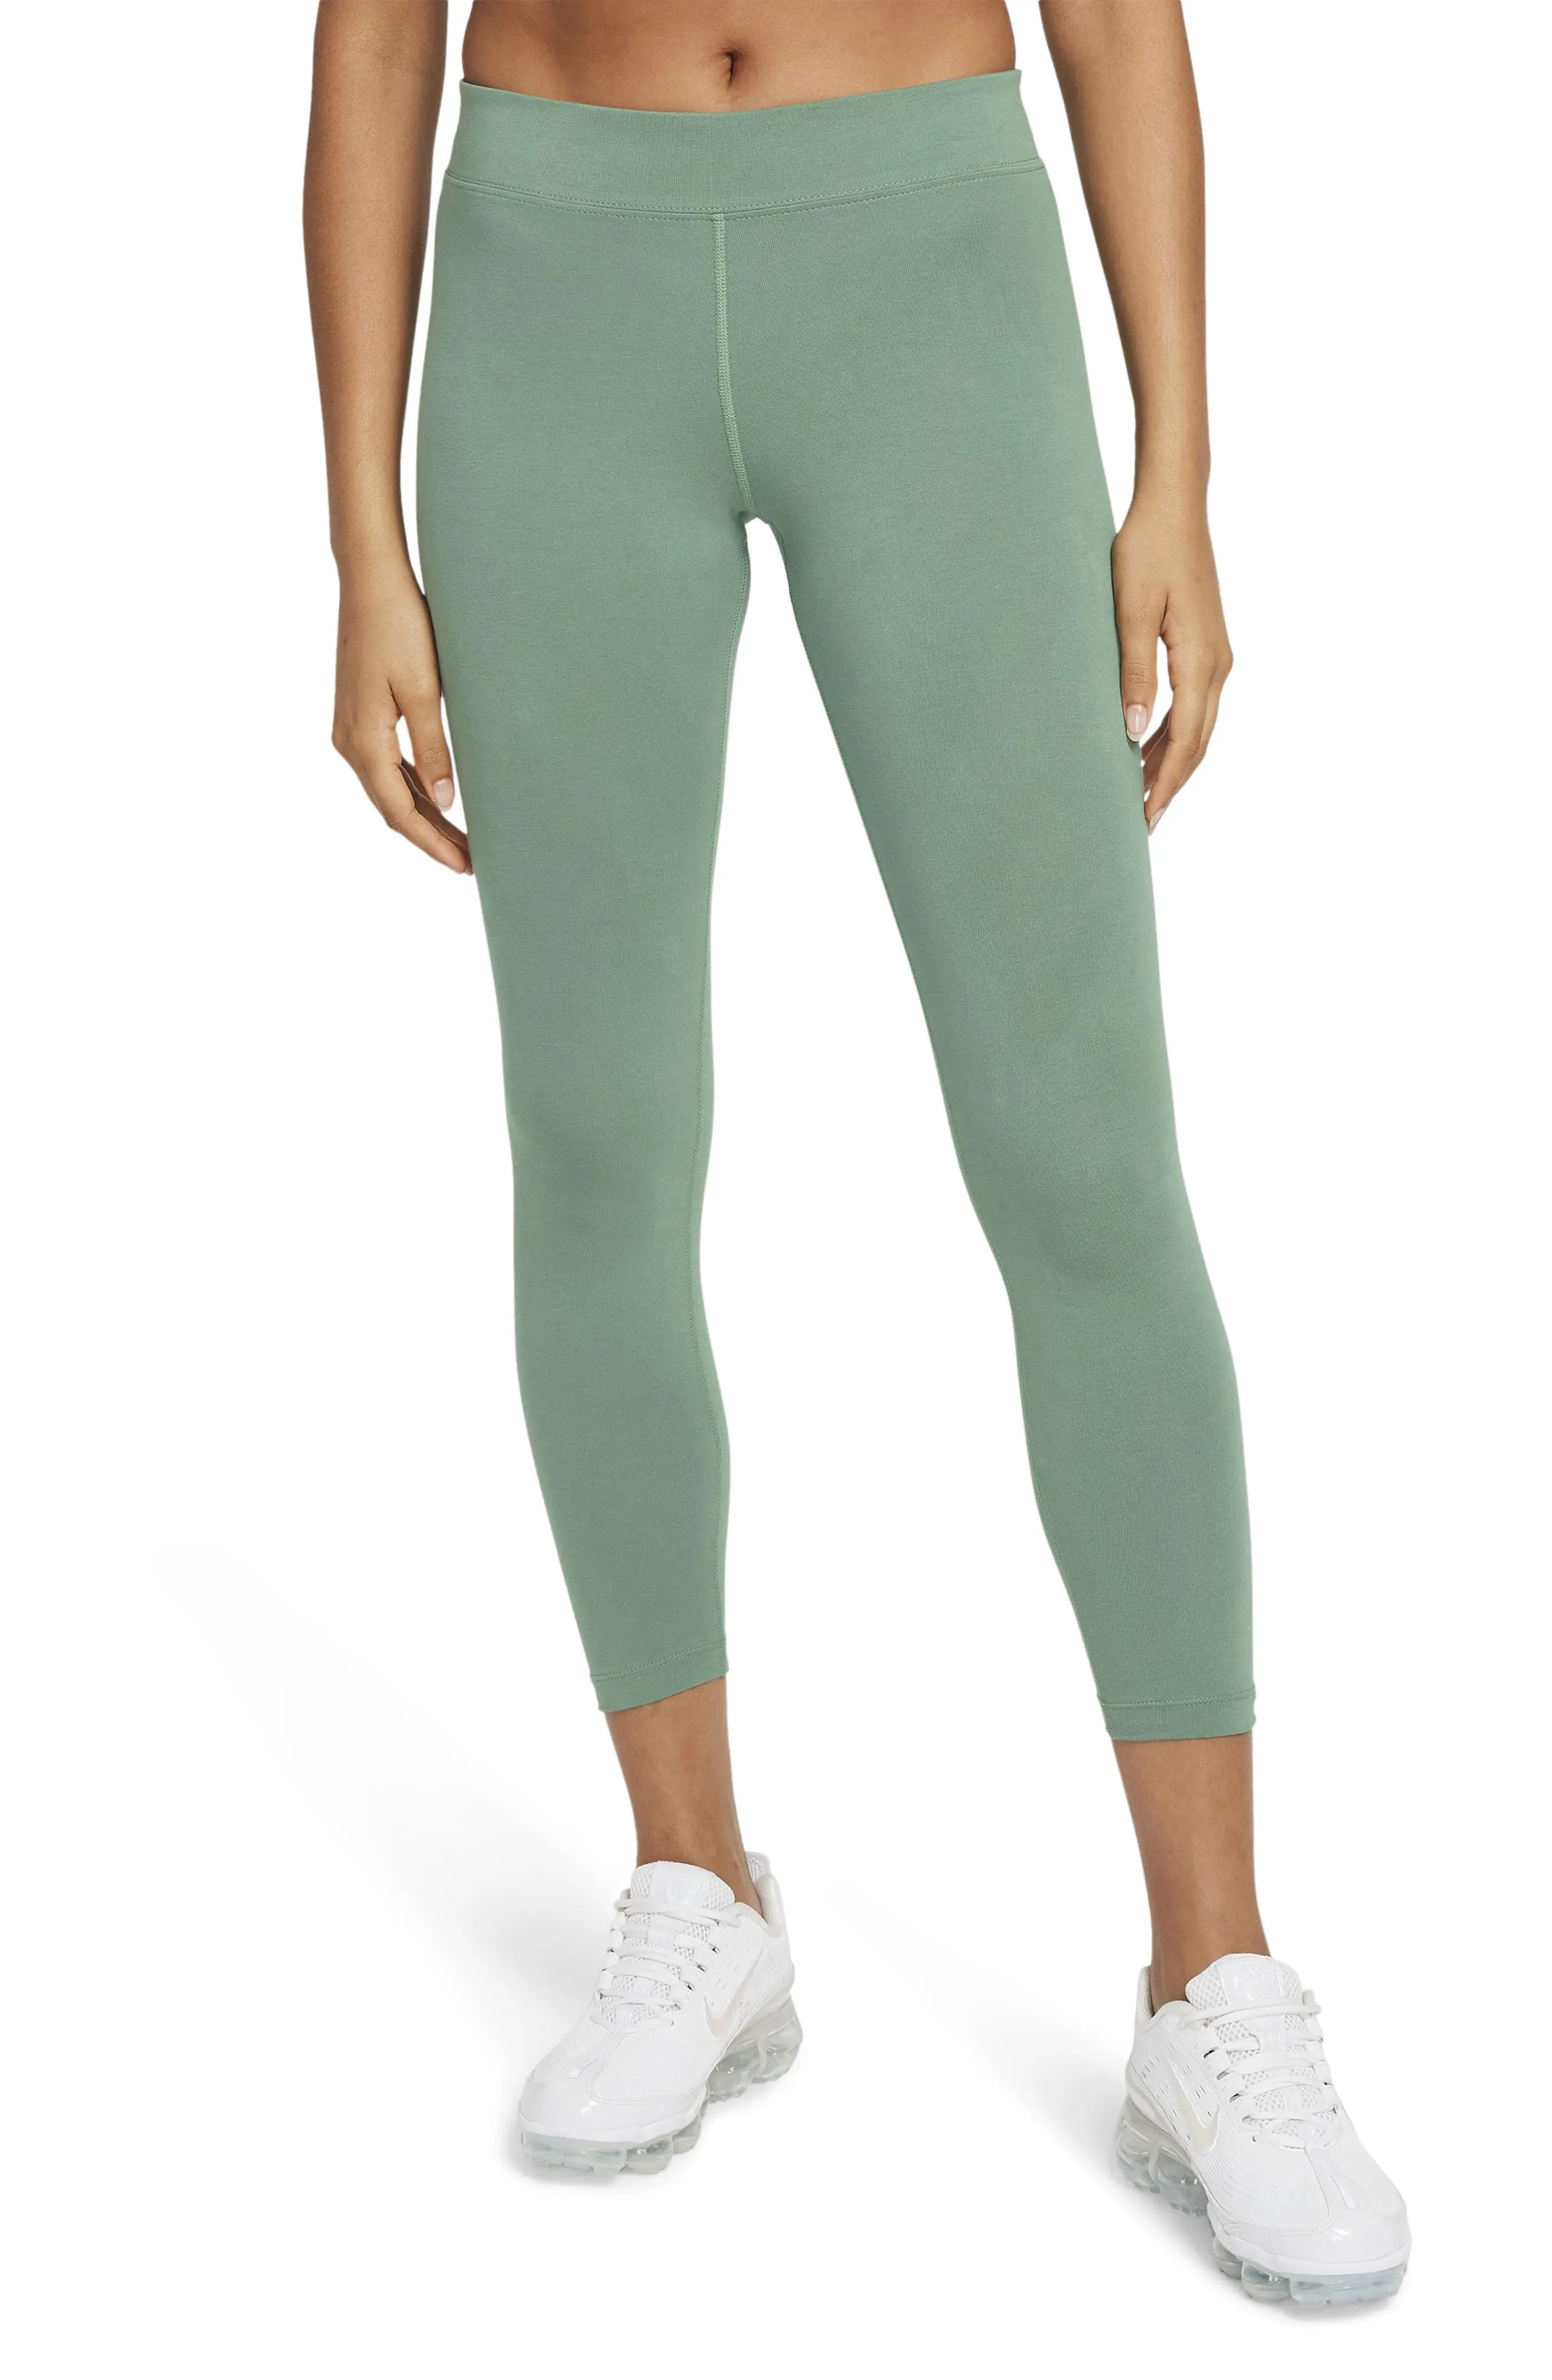 Nike Sportswear Essential 7/8 Leggings in Dutch Green/White at Nordstrom, Size X-Small | Nordstrom